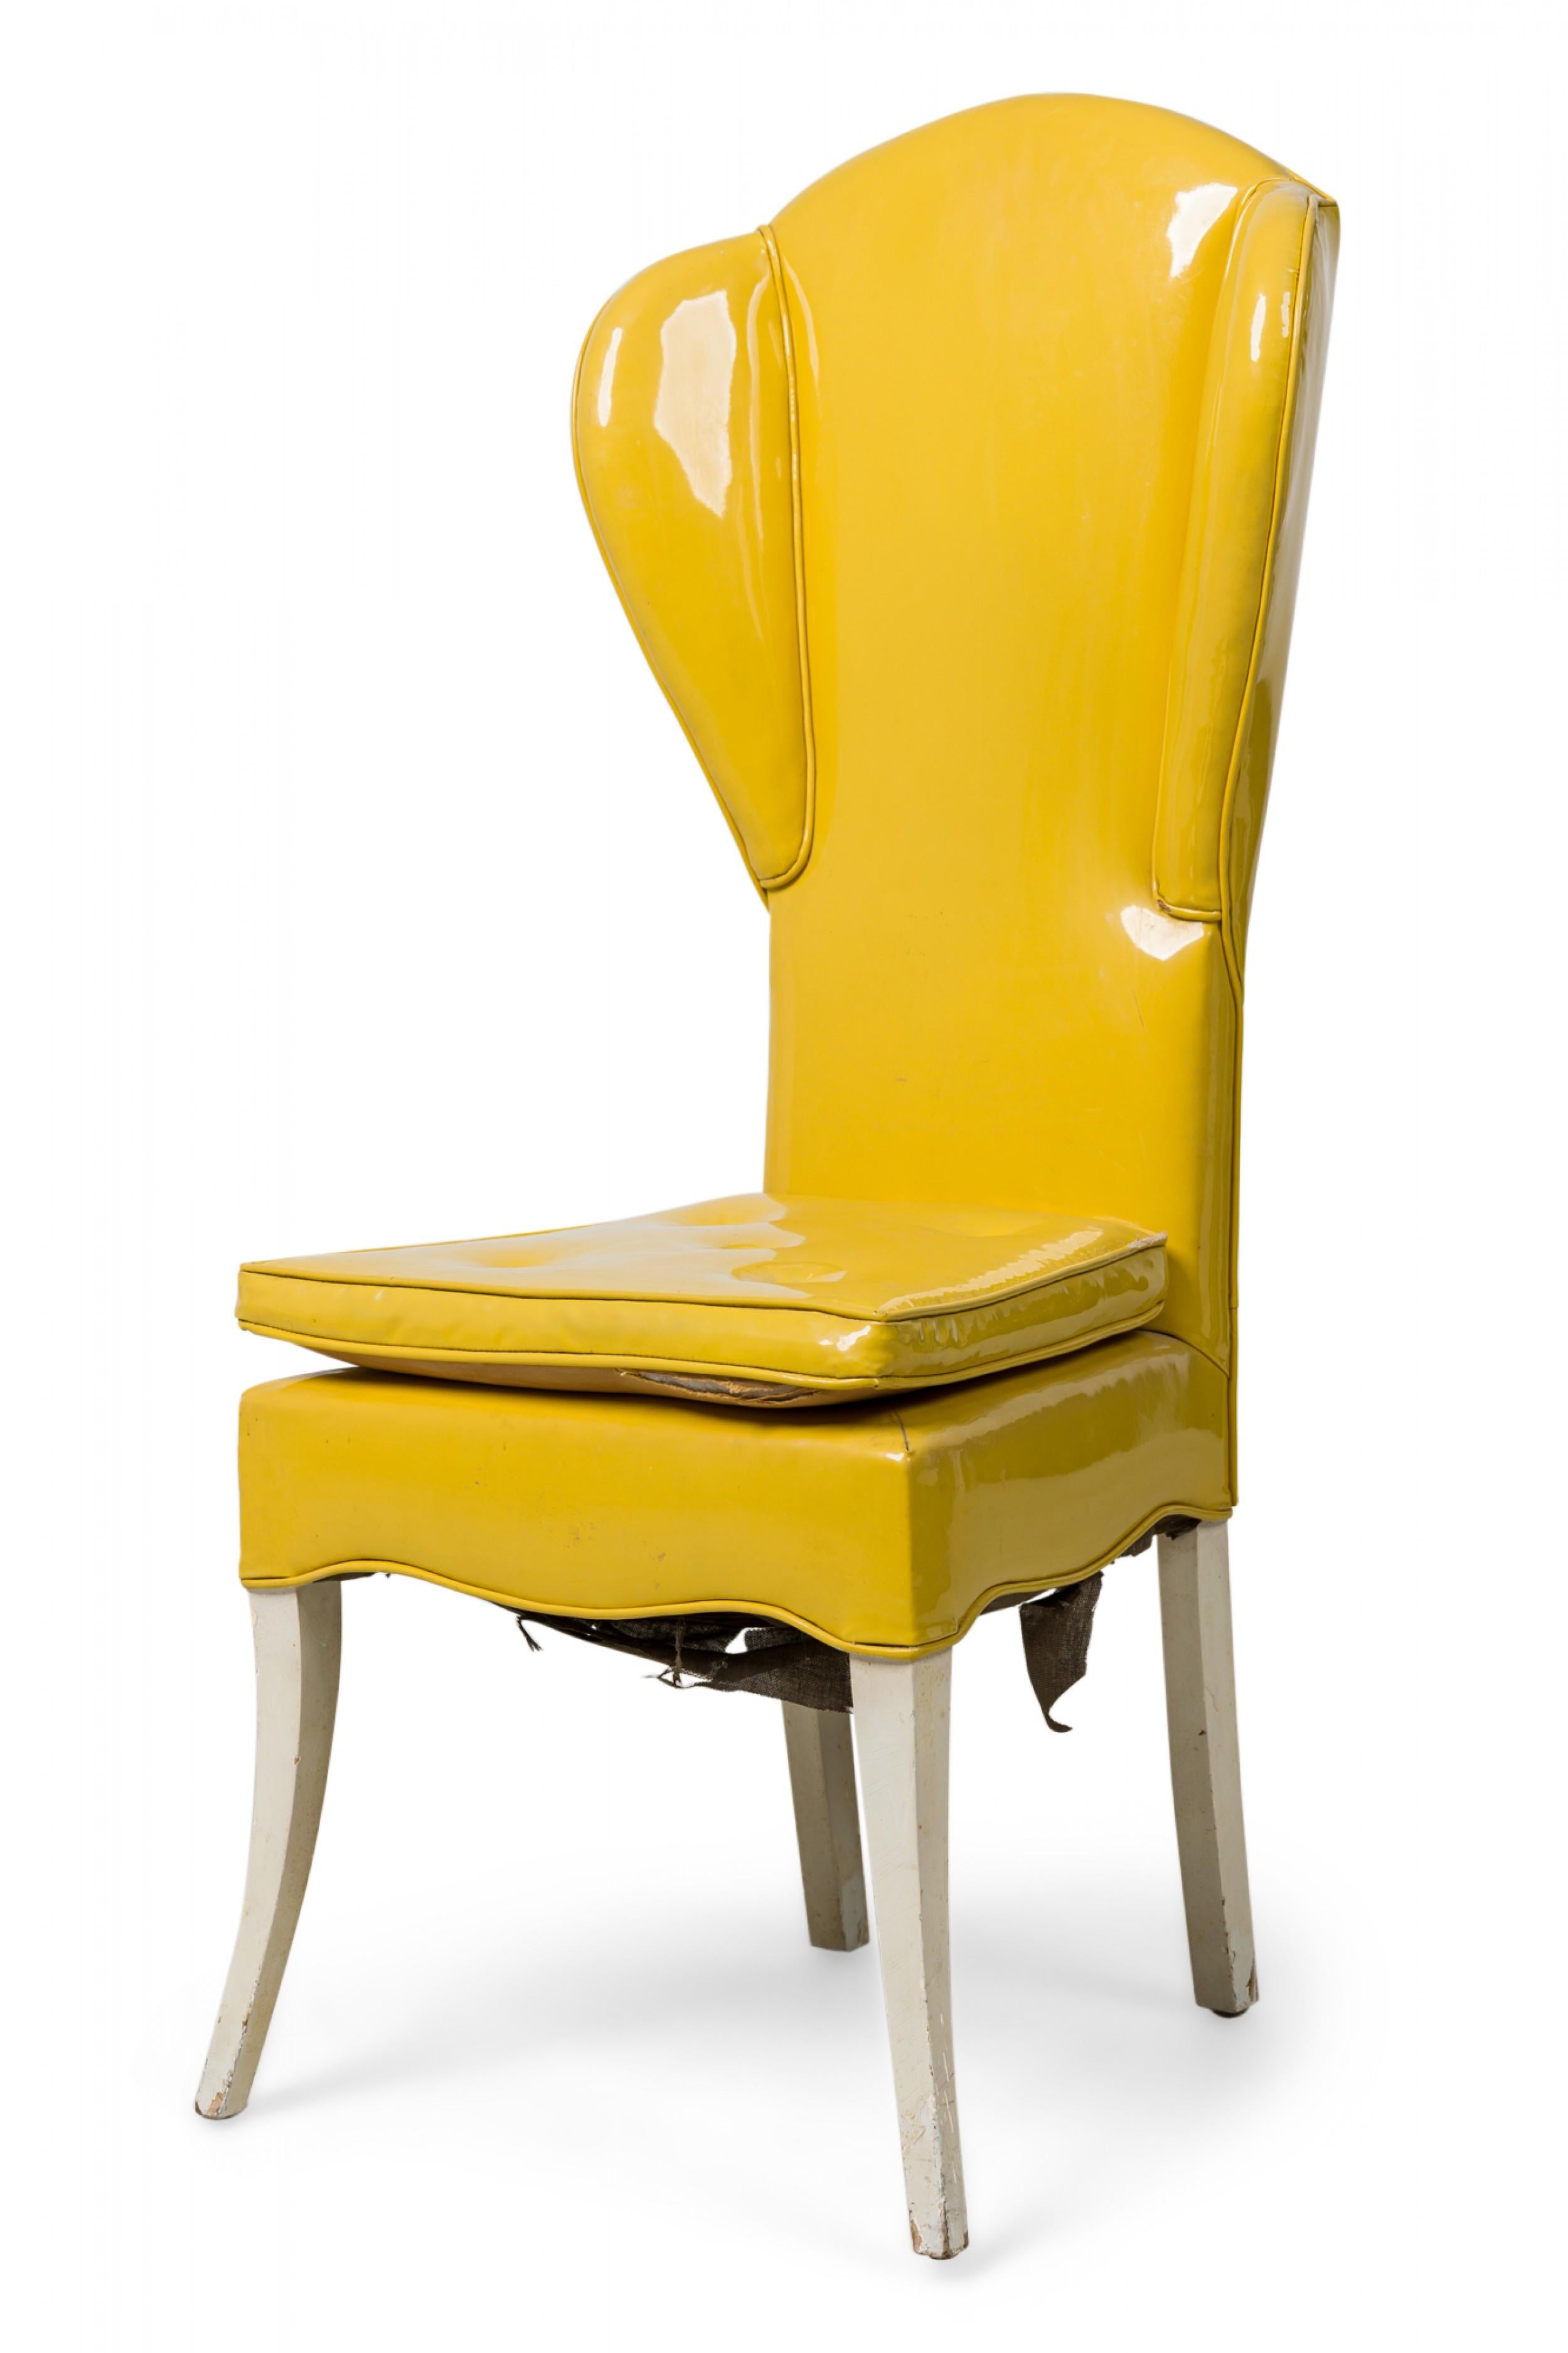 Midcentury American wing chair, padded and upholstered in glossy yellow vinyl with a square seat cushion, shaped apron and white painted splayed legs. (Attibuted to Tommi Parzinger).